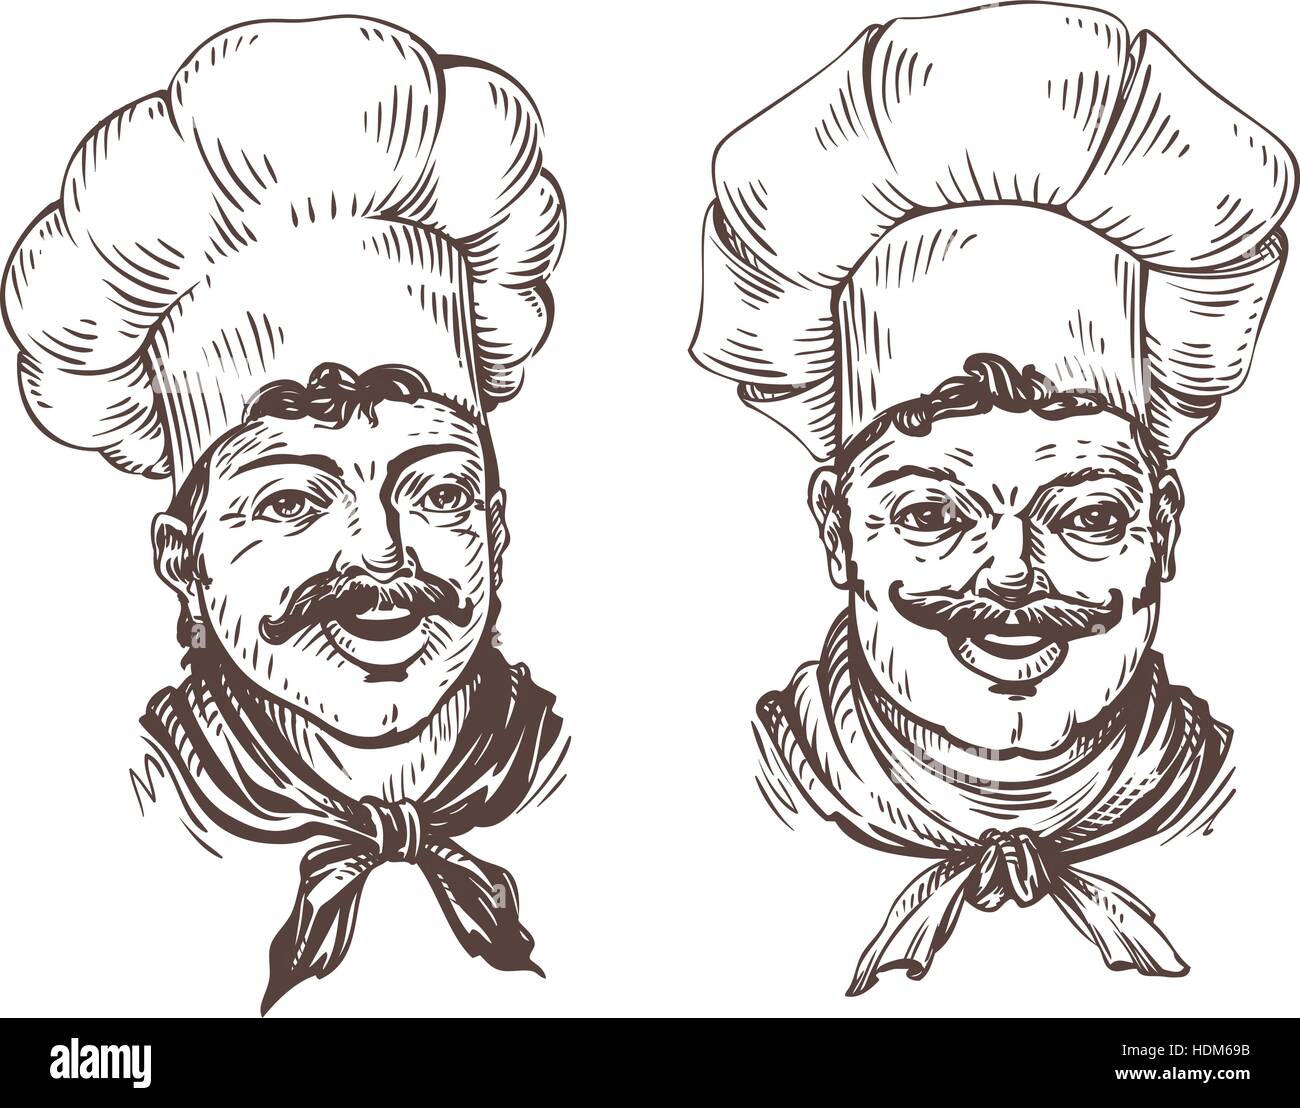 Drawn chef cooks on white background in style of engravings. Vector illustration isolated on white background Stock Vector